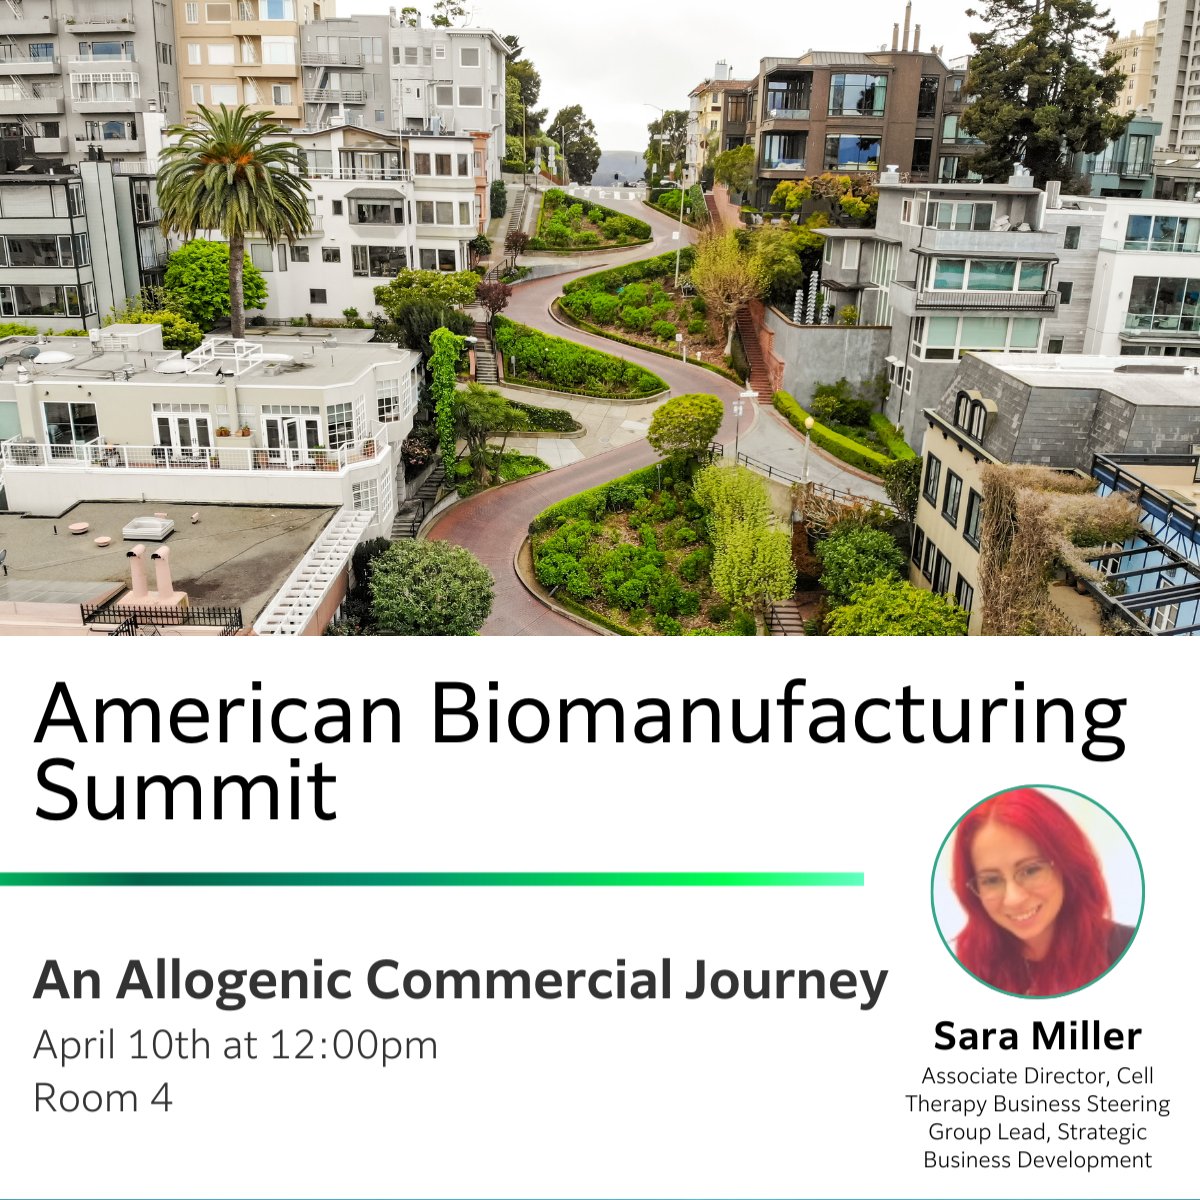 👩‍🔬 Don't miss out on our American Biomanufacturing Summit workshop with Sara Miller, Associate Director of Cell Therapy Business, who will be speaking on 'An Allogenic Commercial Journey' today at 12 PM 👩‍🔬 #Biomanufacturing #Innovation #CellTherapy